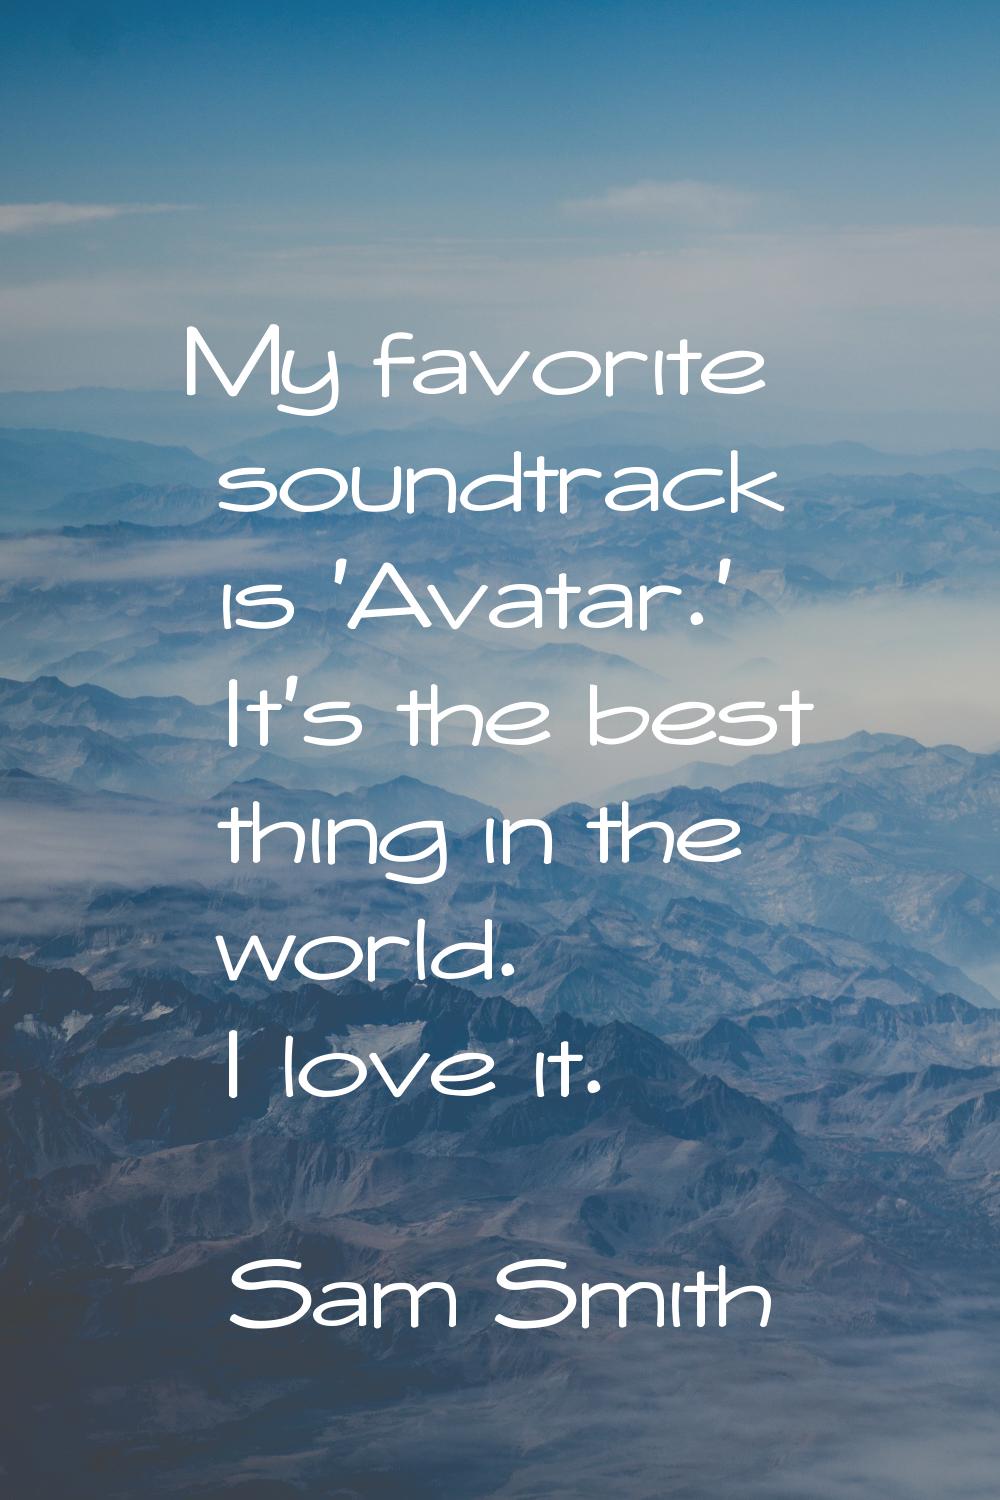 My favorite soundtrack is 'Avatar.' It's the best thing in the world. I love it.